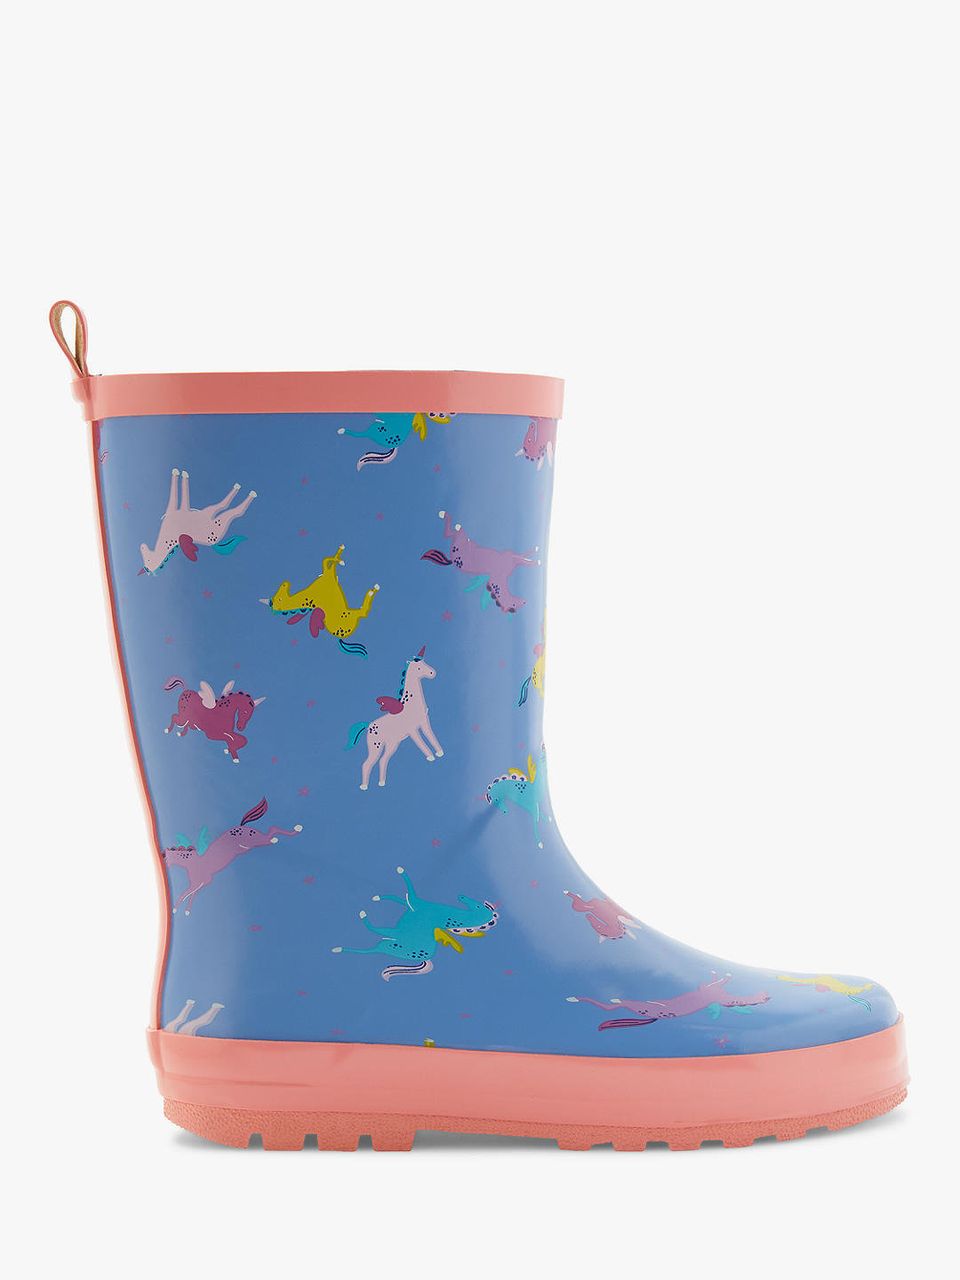 Window Shopping: 5 Puddle-Proof Kids' Wellies We Love | HuffPost UK Parents